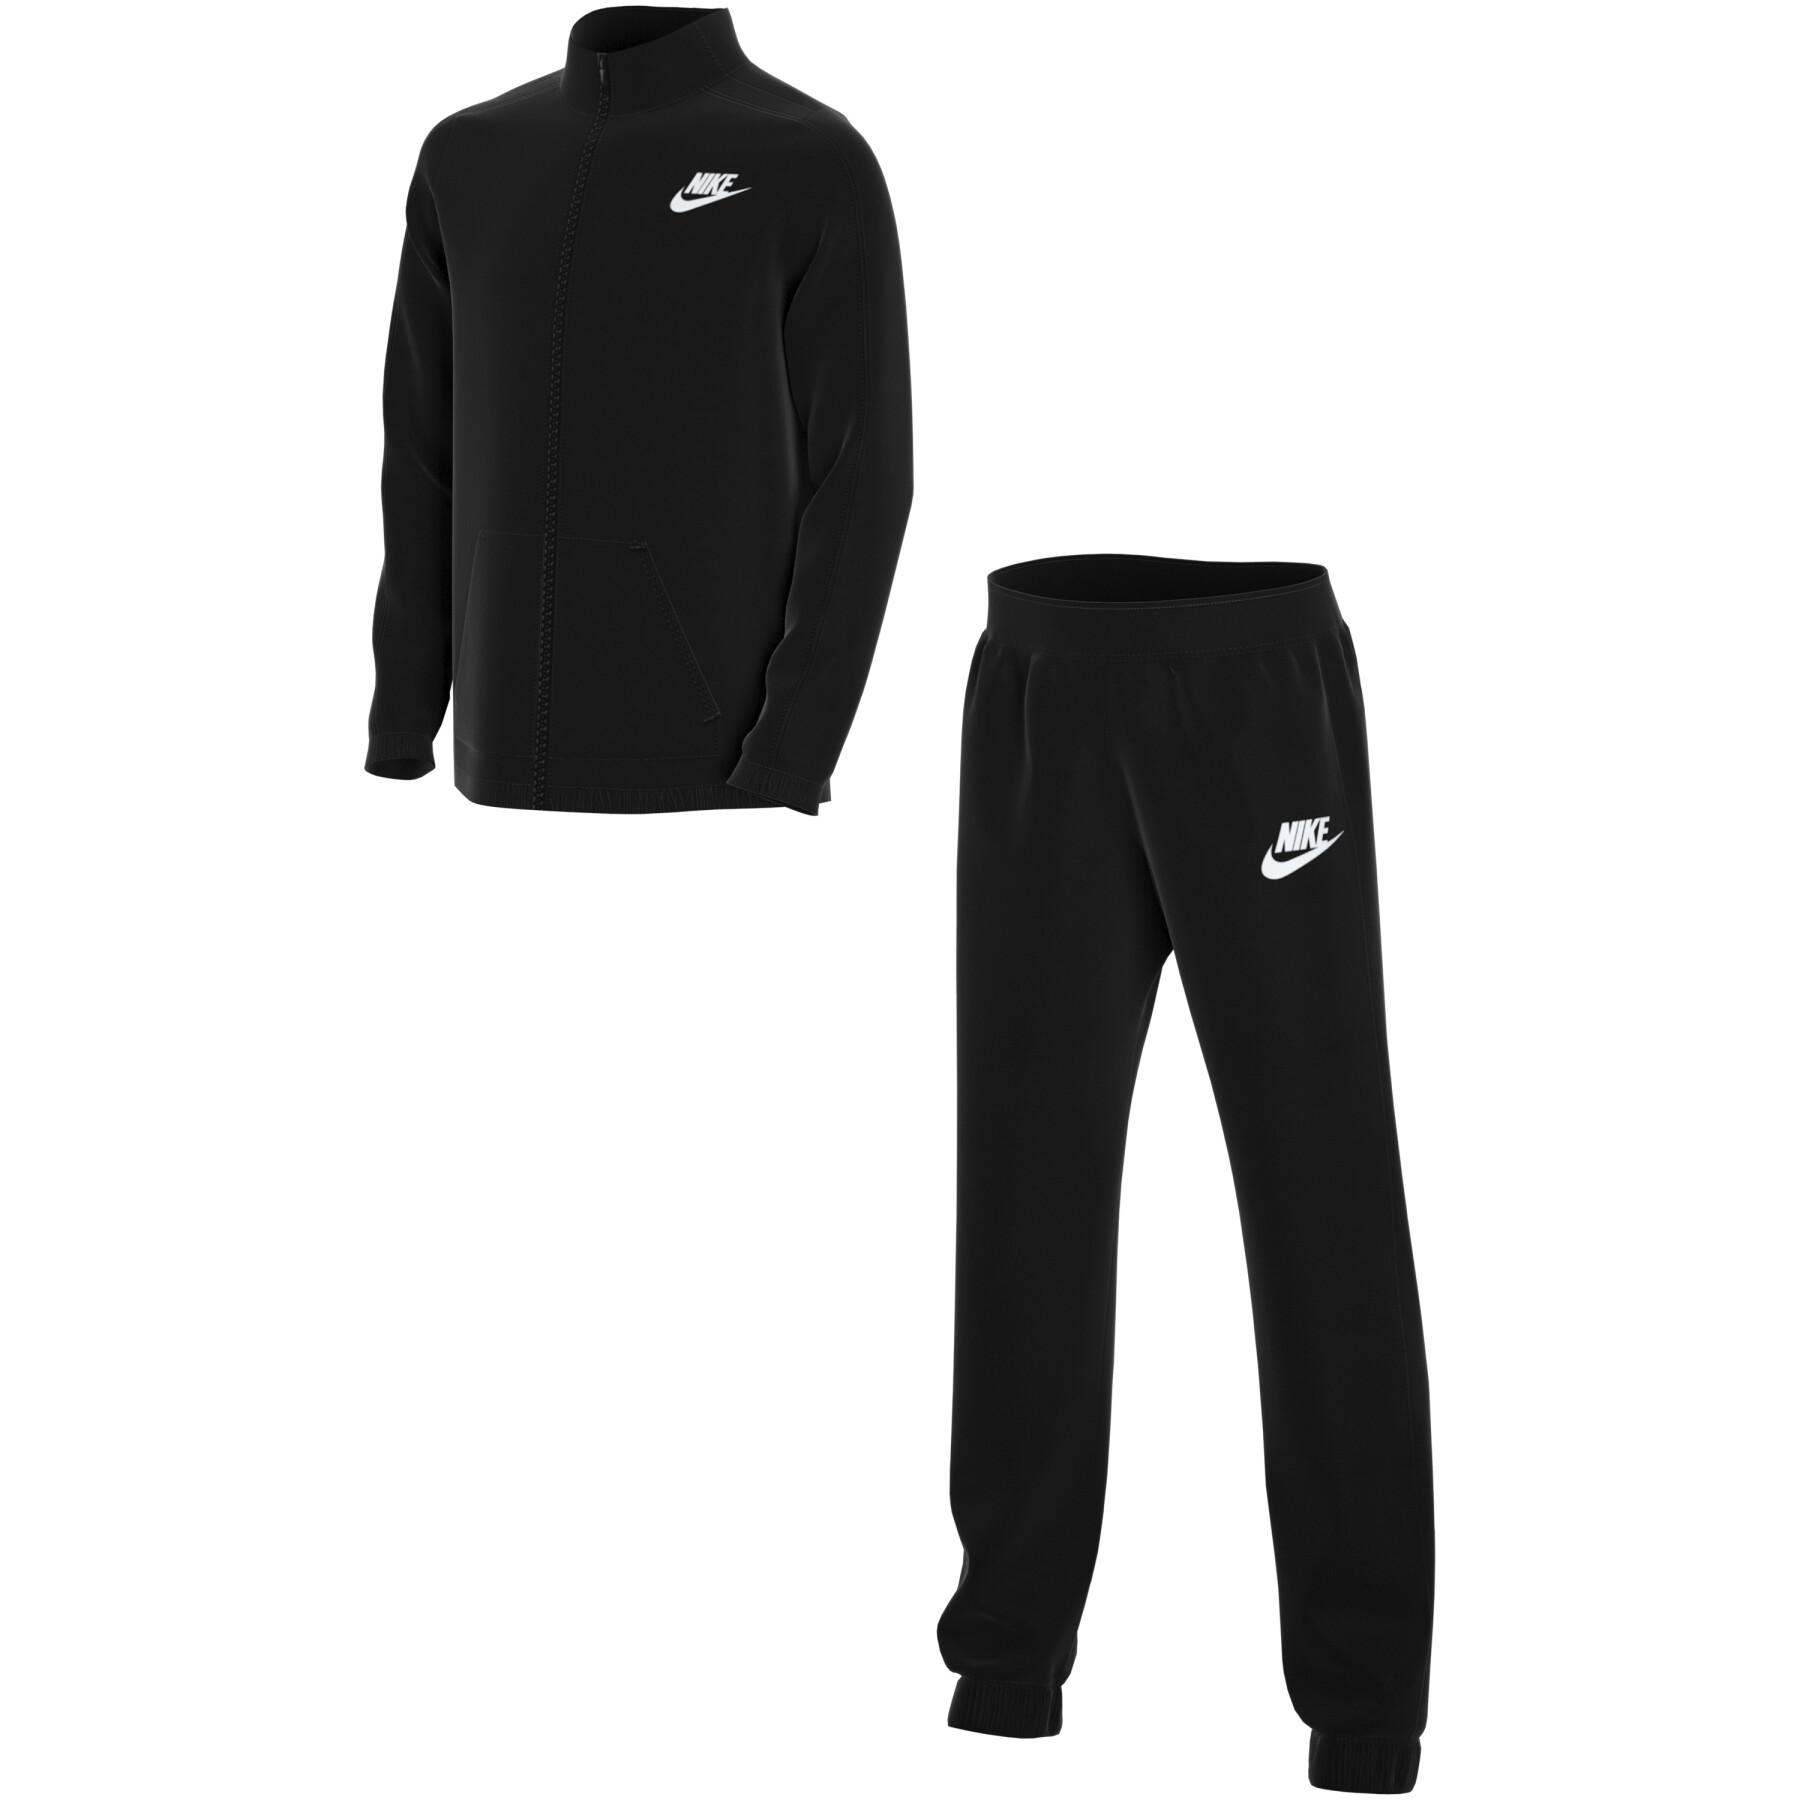 Children's tracksuit Nike sportswear futura - Jackets and tracksuits ...